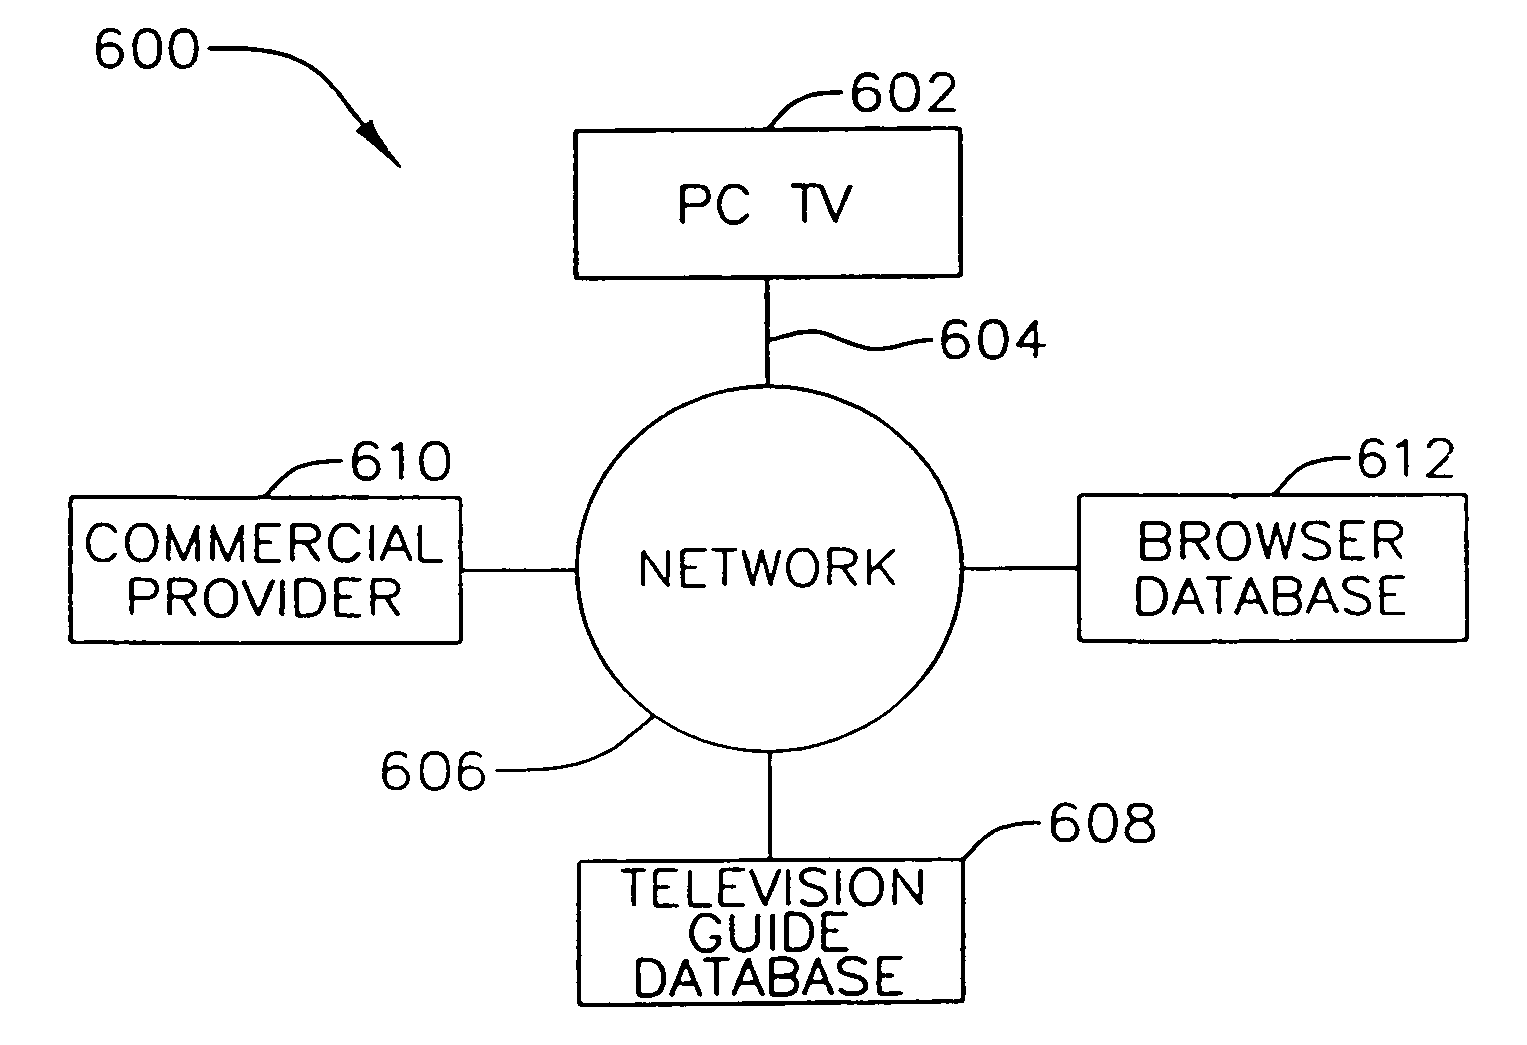 Interactive computer system for providing television schedule information